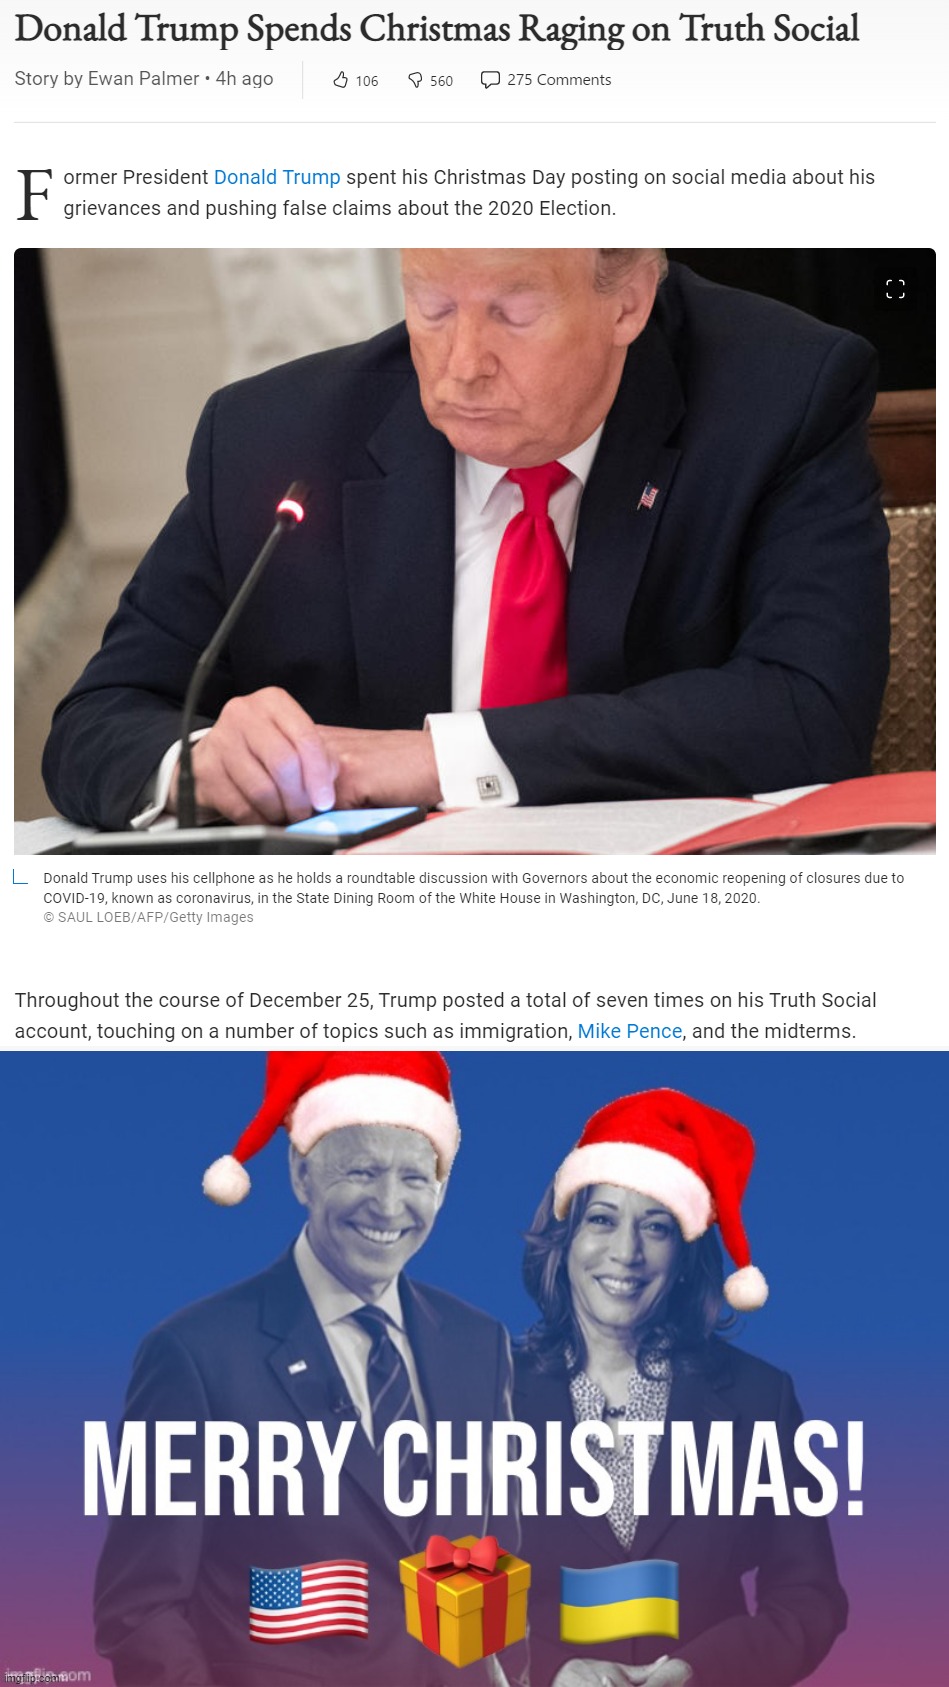 Merry Christmas to you too, Trump! Hope you get to feeling better! :) #sad | image tagged in donald trump spends christmas raging on truth social,merry christmas,social media,election 2020,2020 elections,sad | made w/ Imgflip meme maker